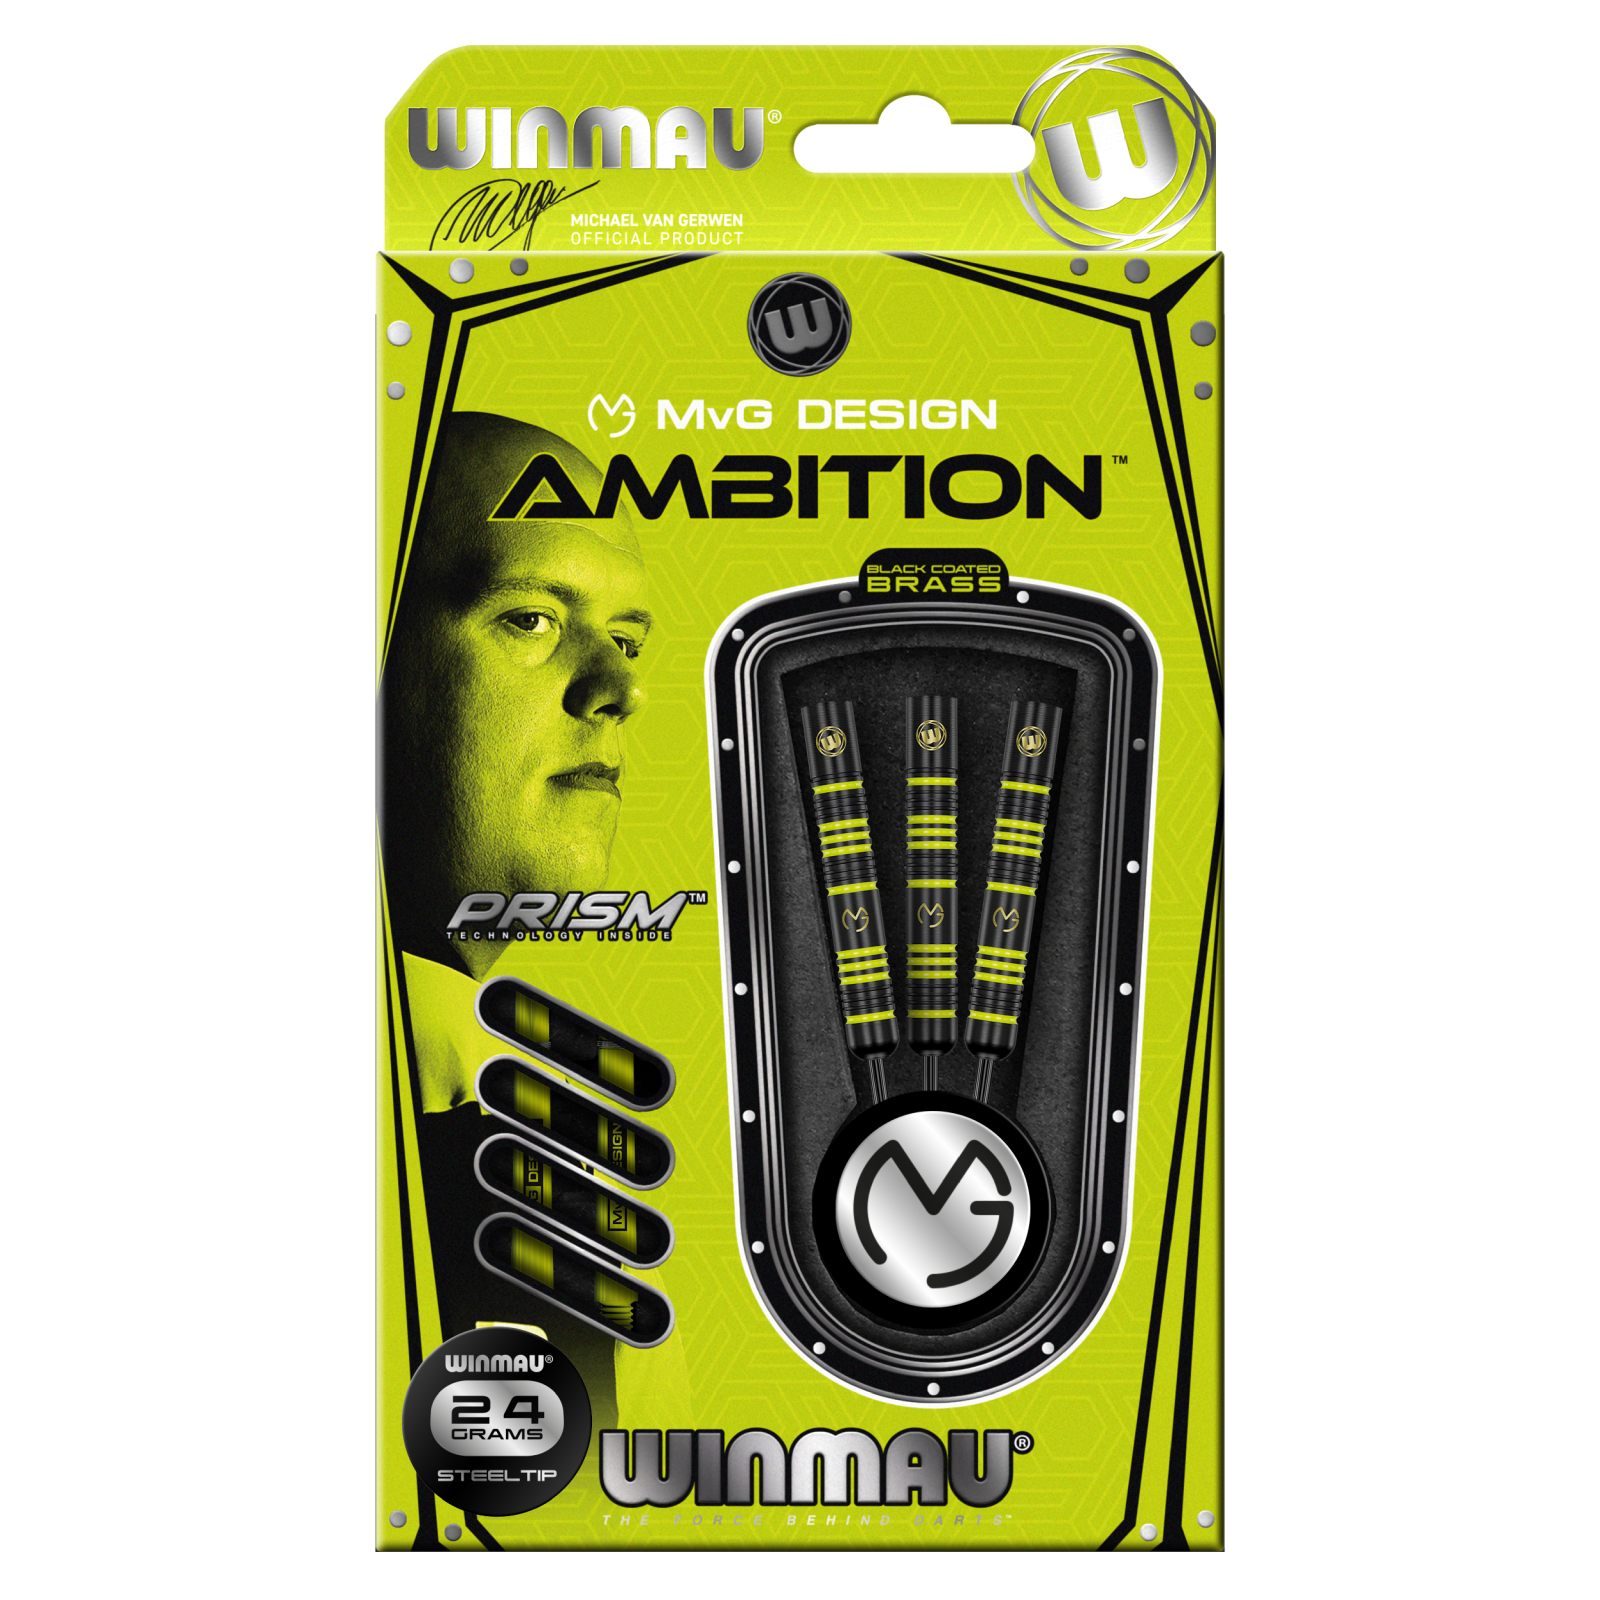 MvG Ambition 24g – Packaging